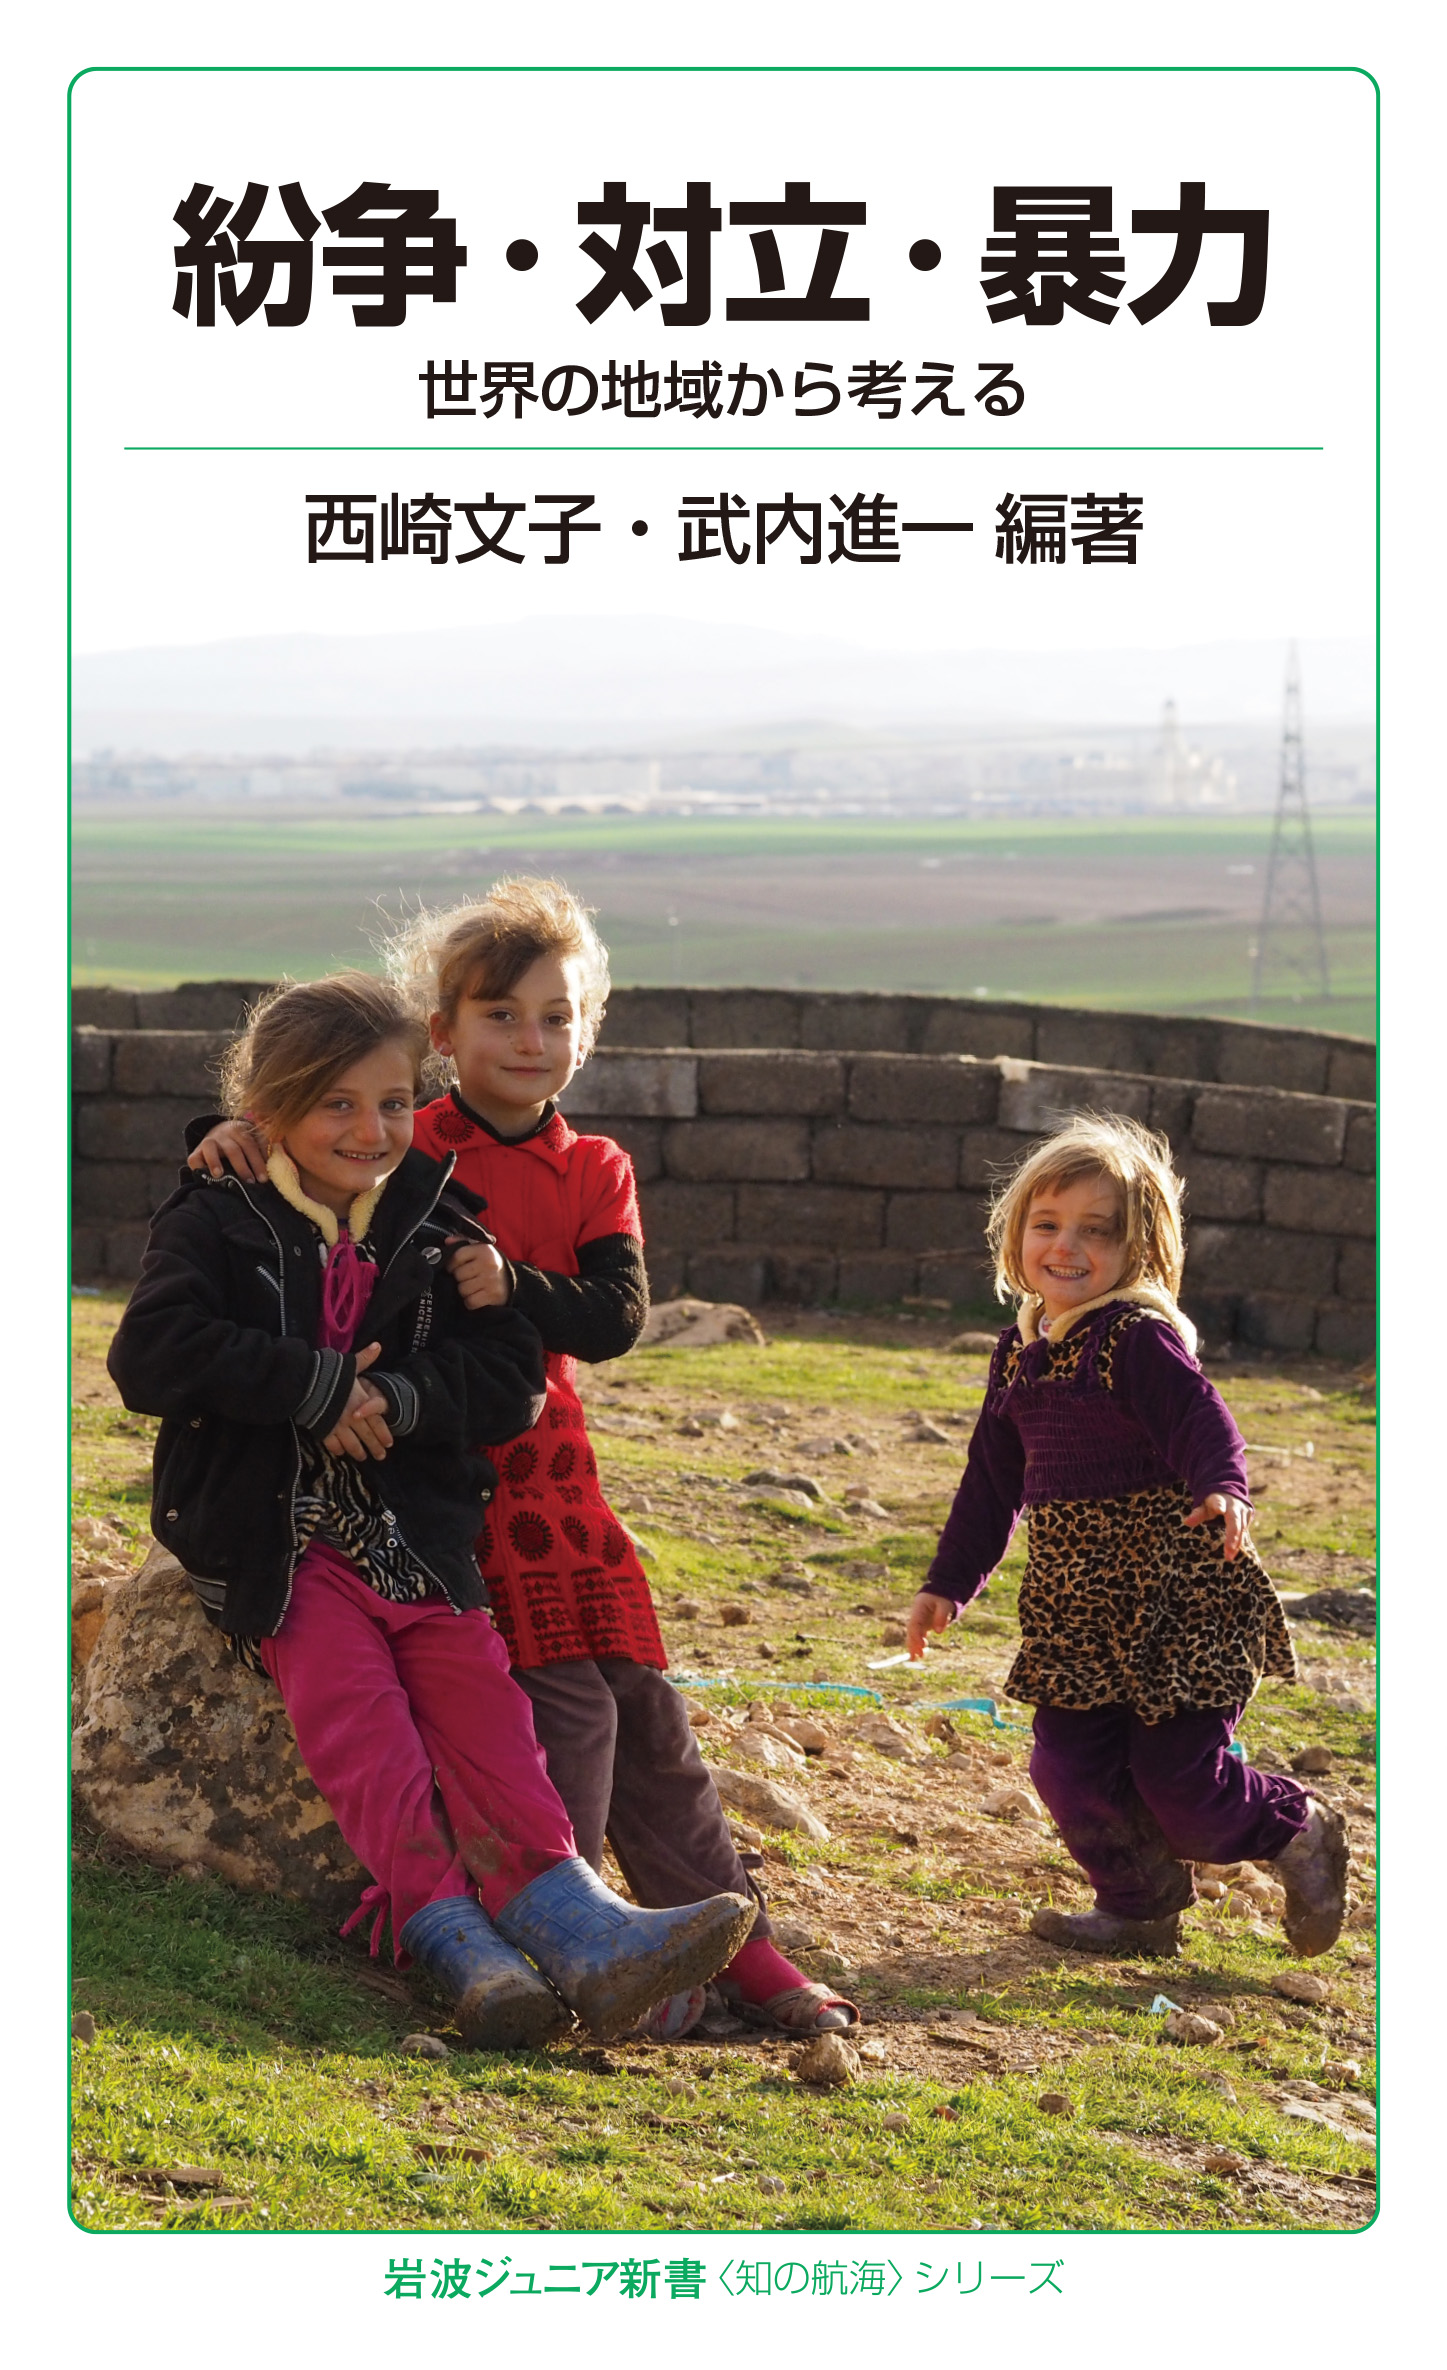 Cover with a picture of kids playing around